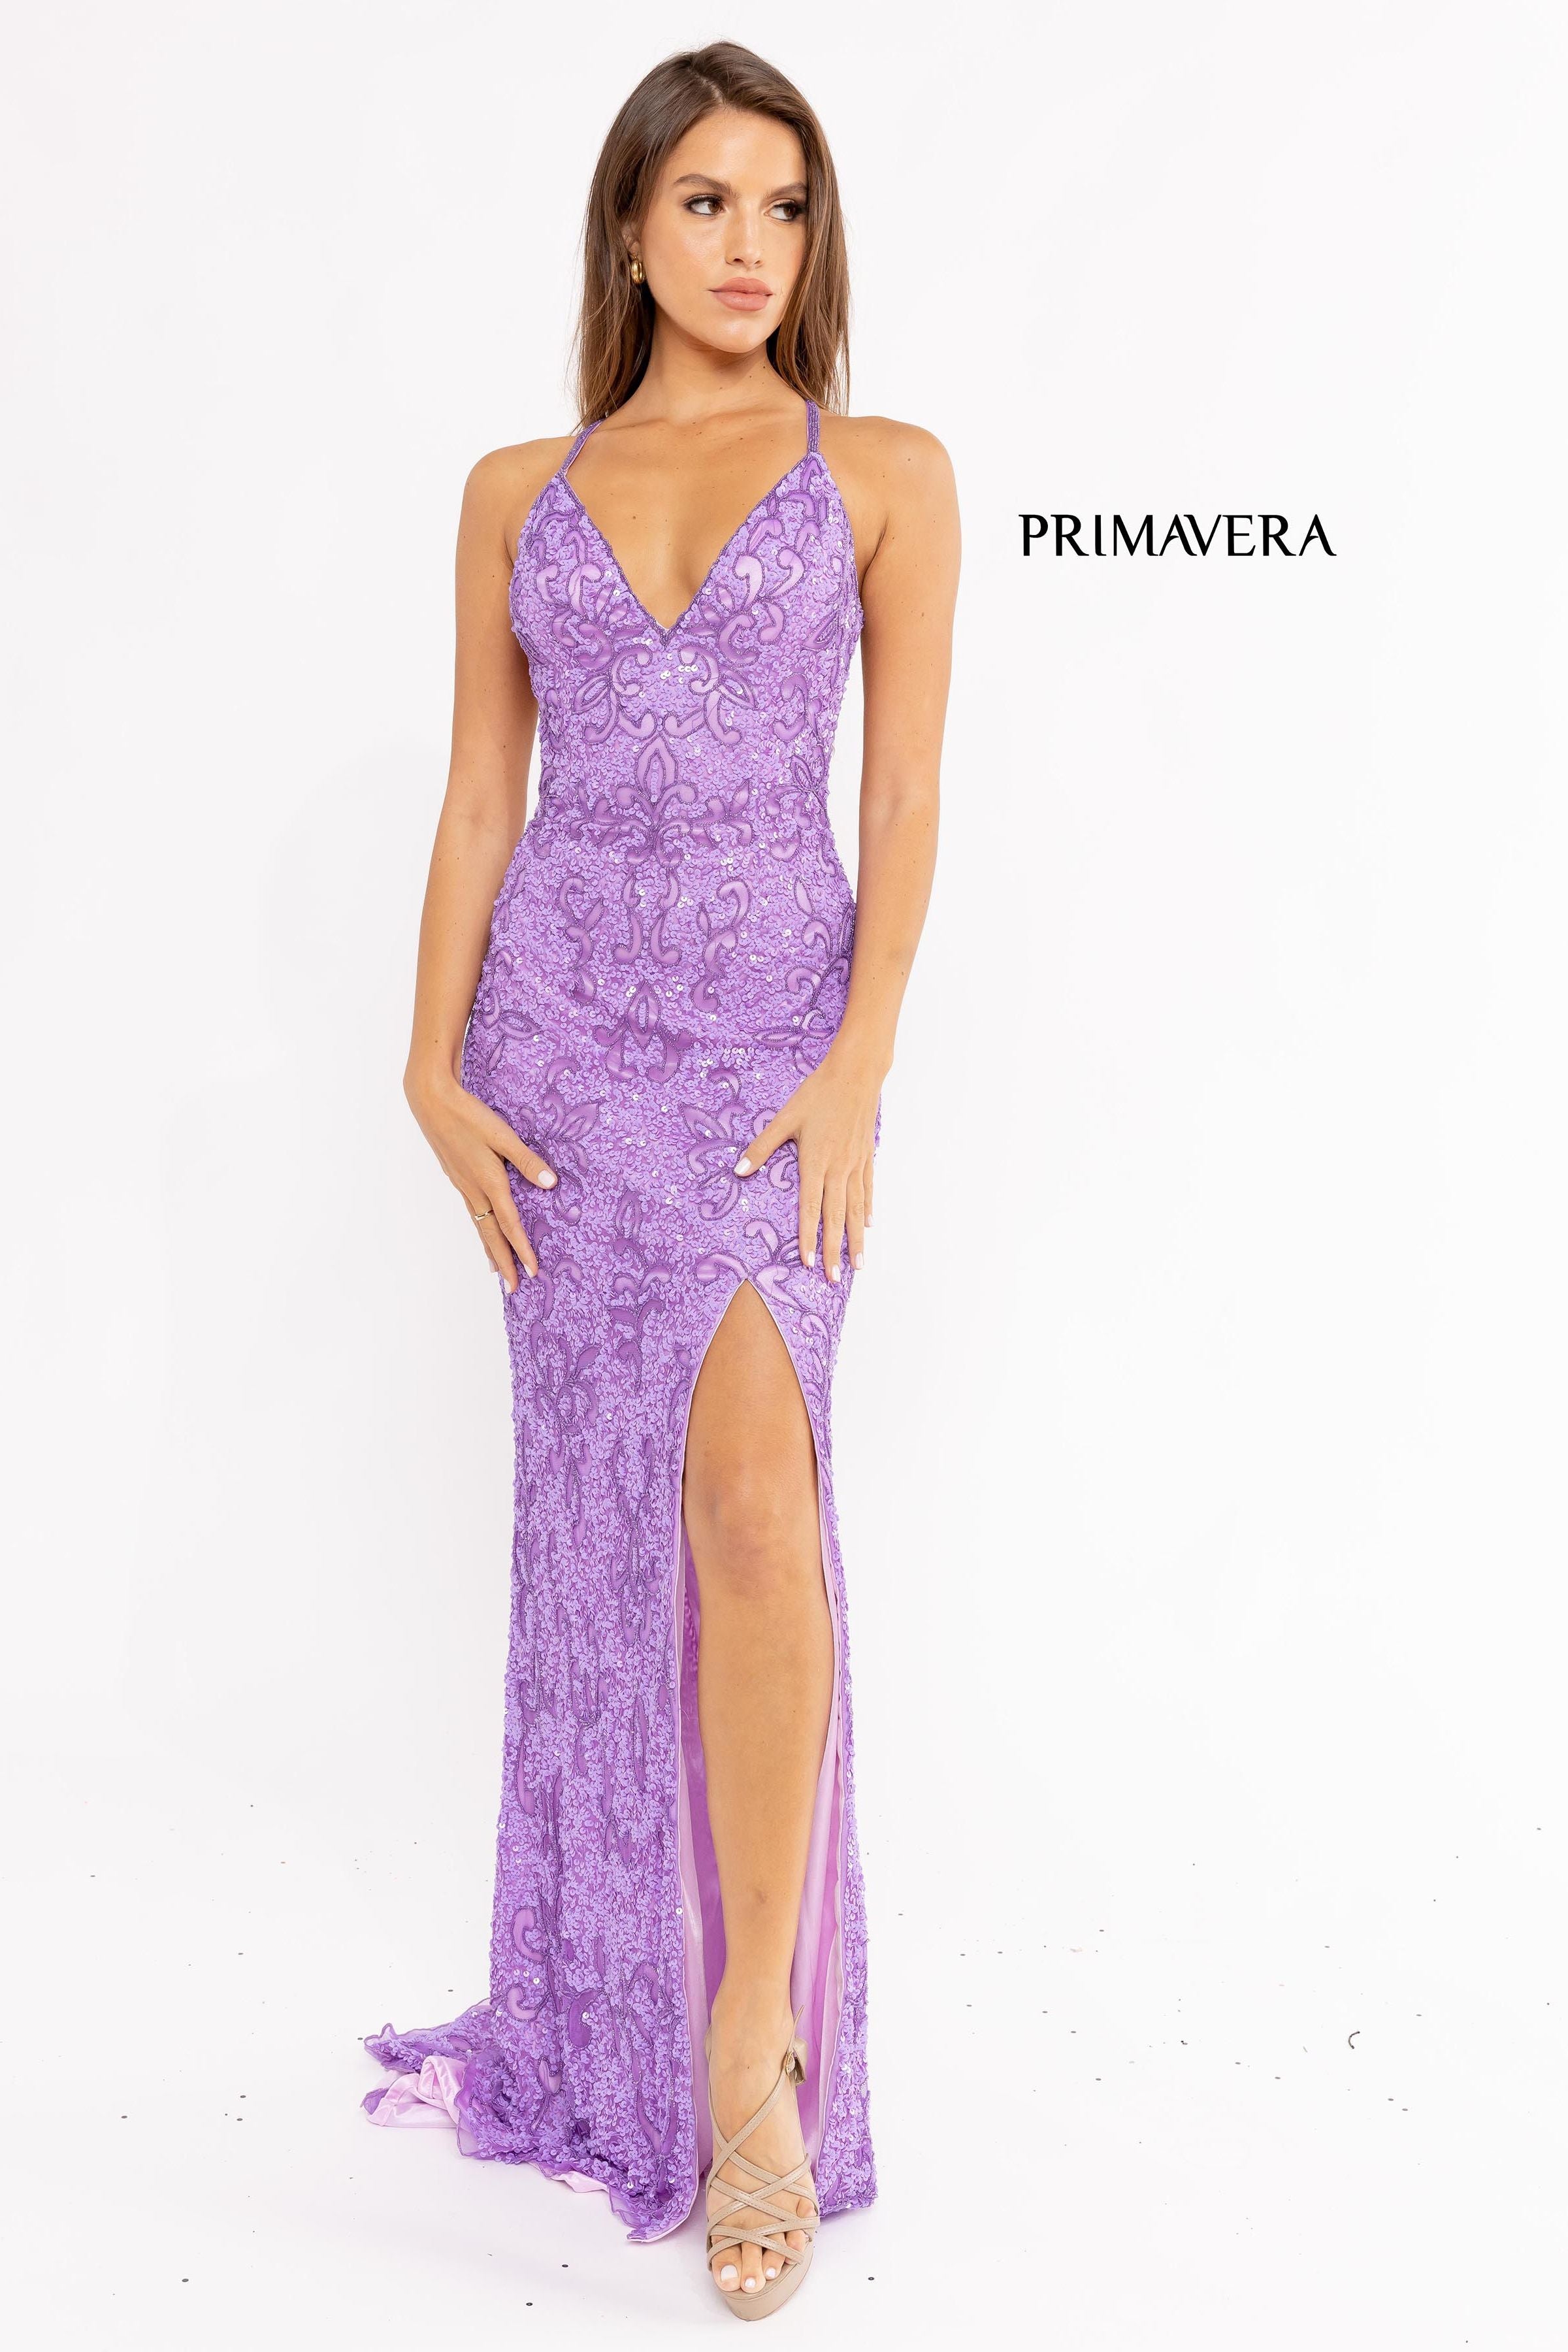 Full Sequin Beaded Dress With V Neckline 01 By Primavera Couture -3295